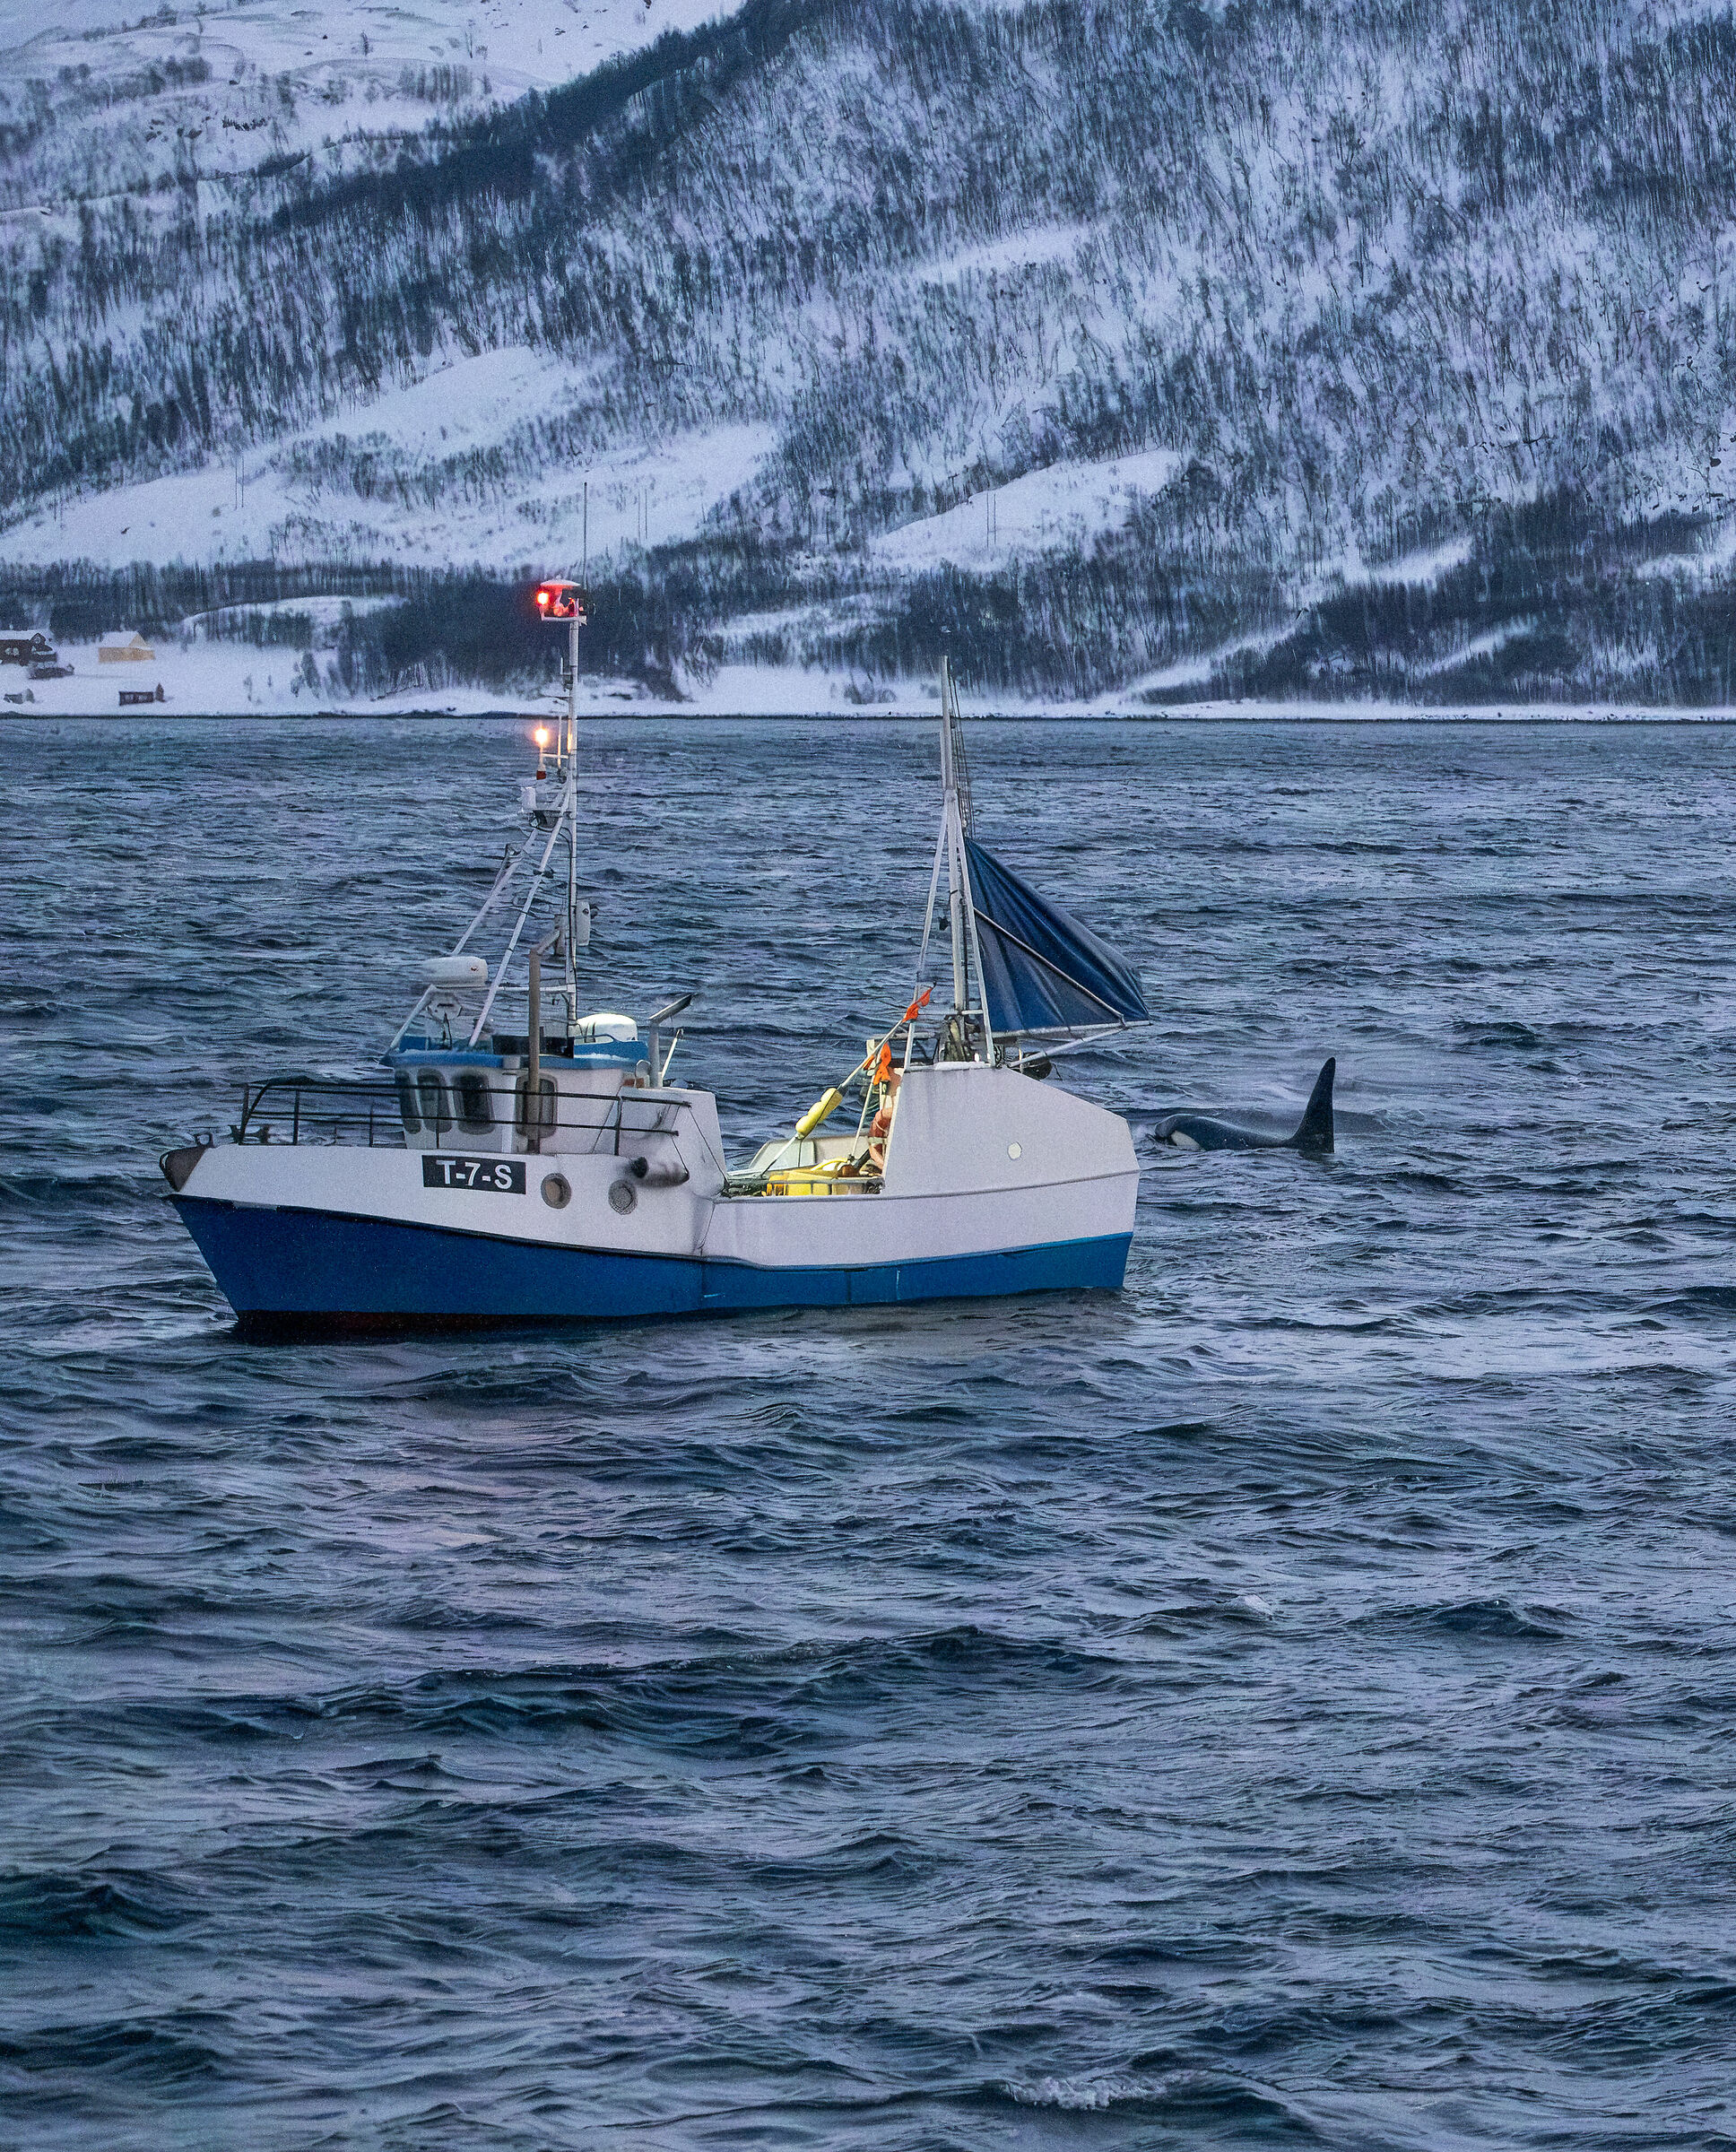 Fisherman and orcas...